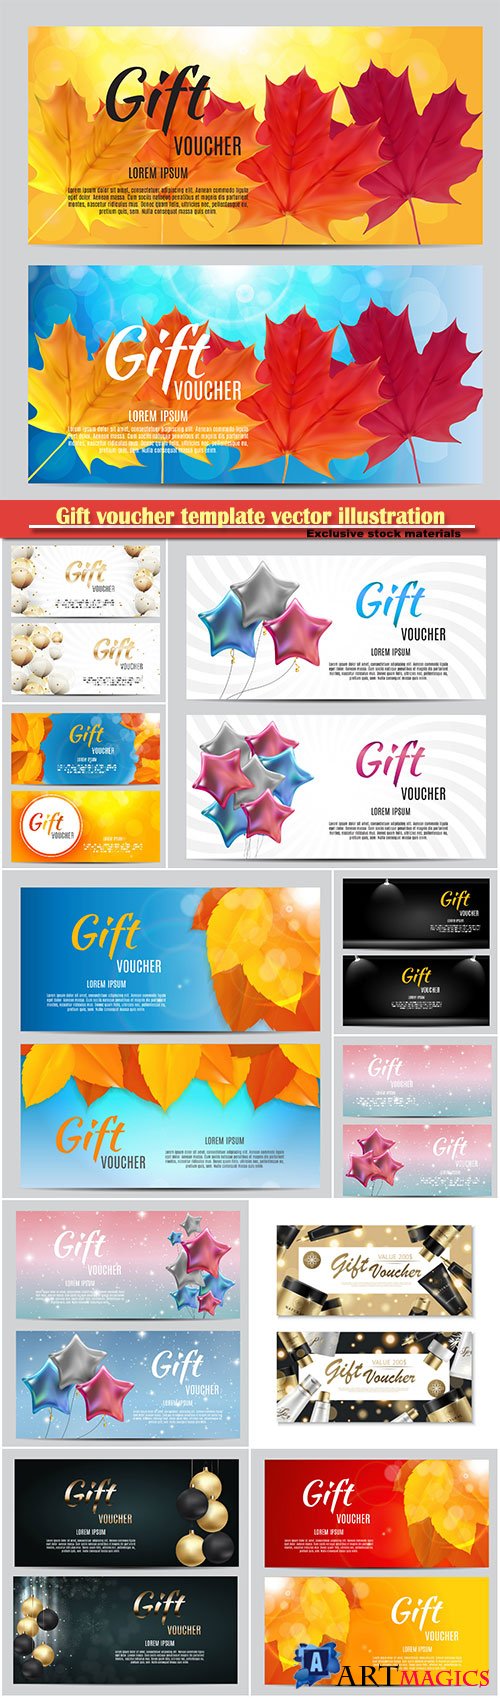 Gift voucher template vector illustration for your business